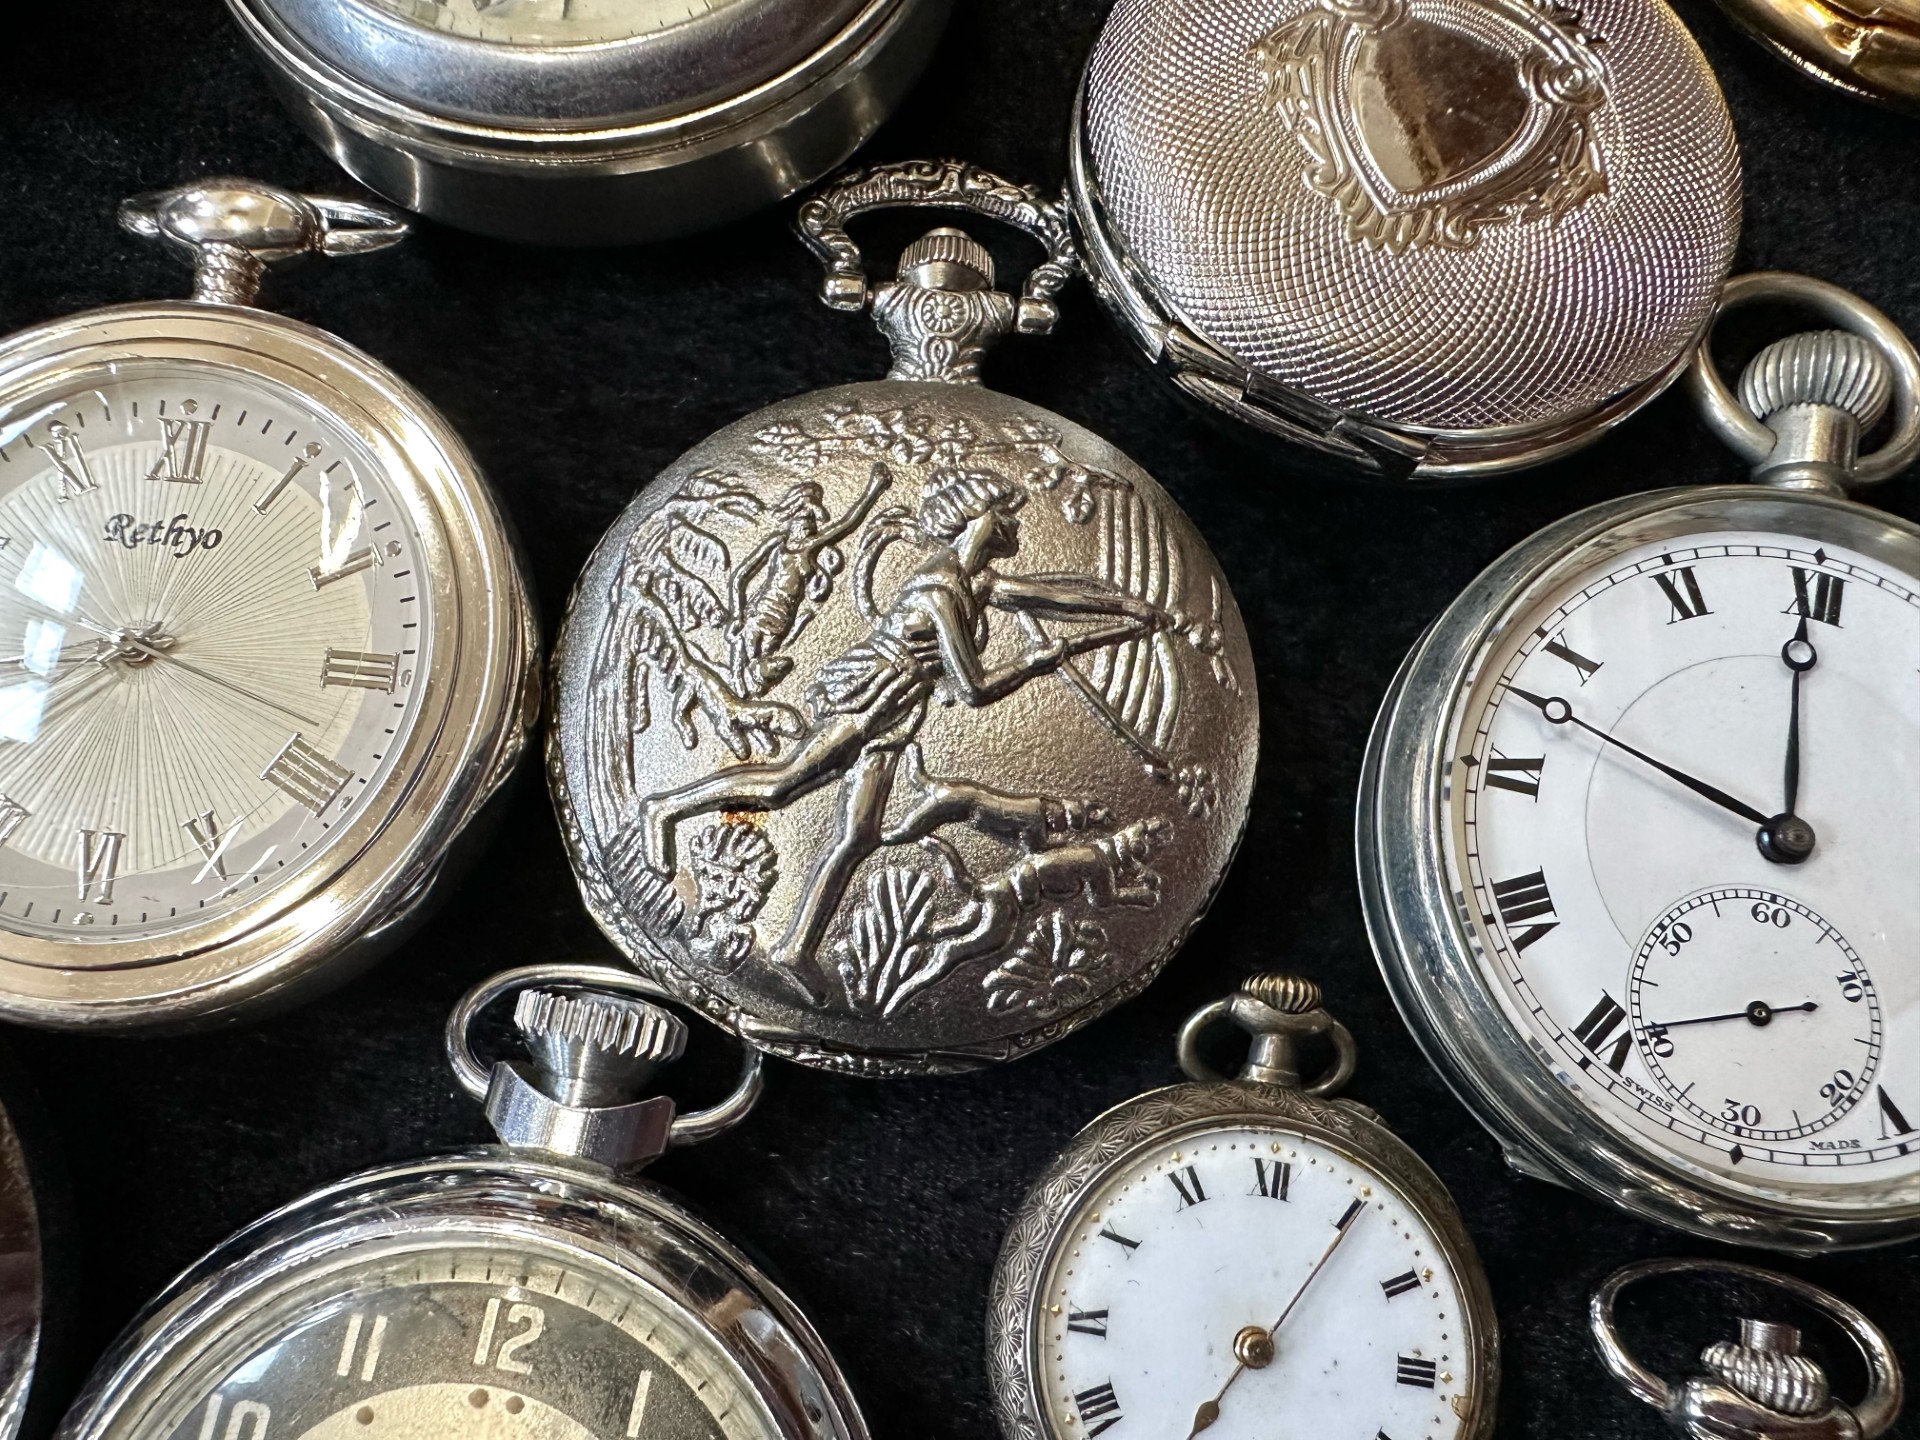 Large Collection of Assorted Pocket Watches, assorted sizes, makes and designs. Makes include - Image 2 of 3